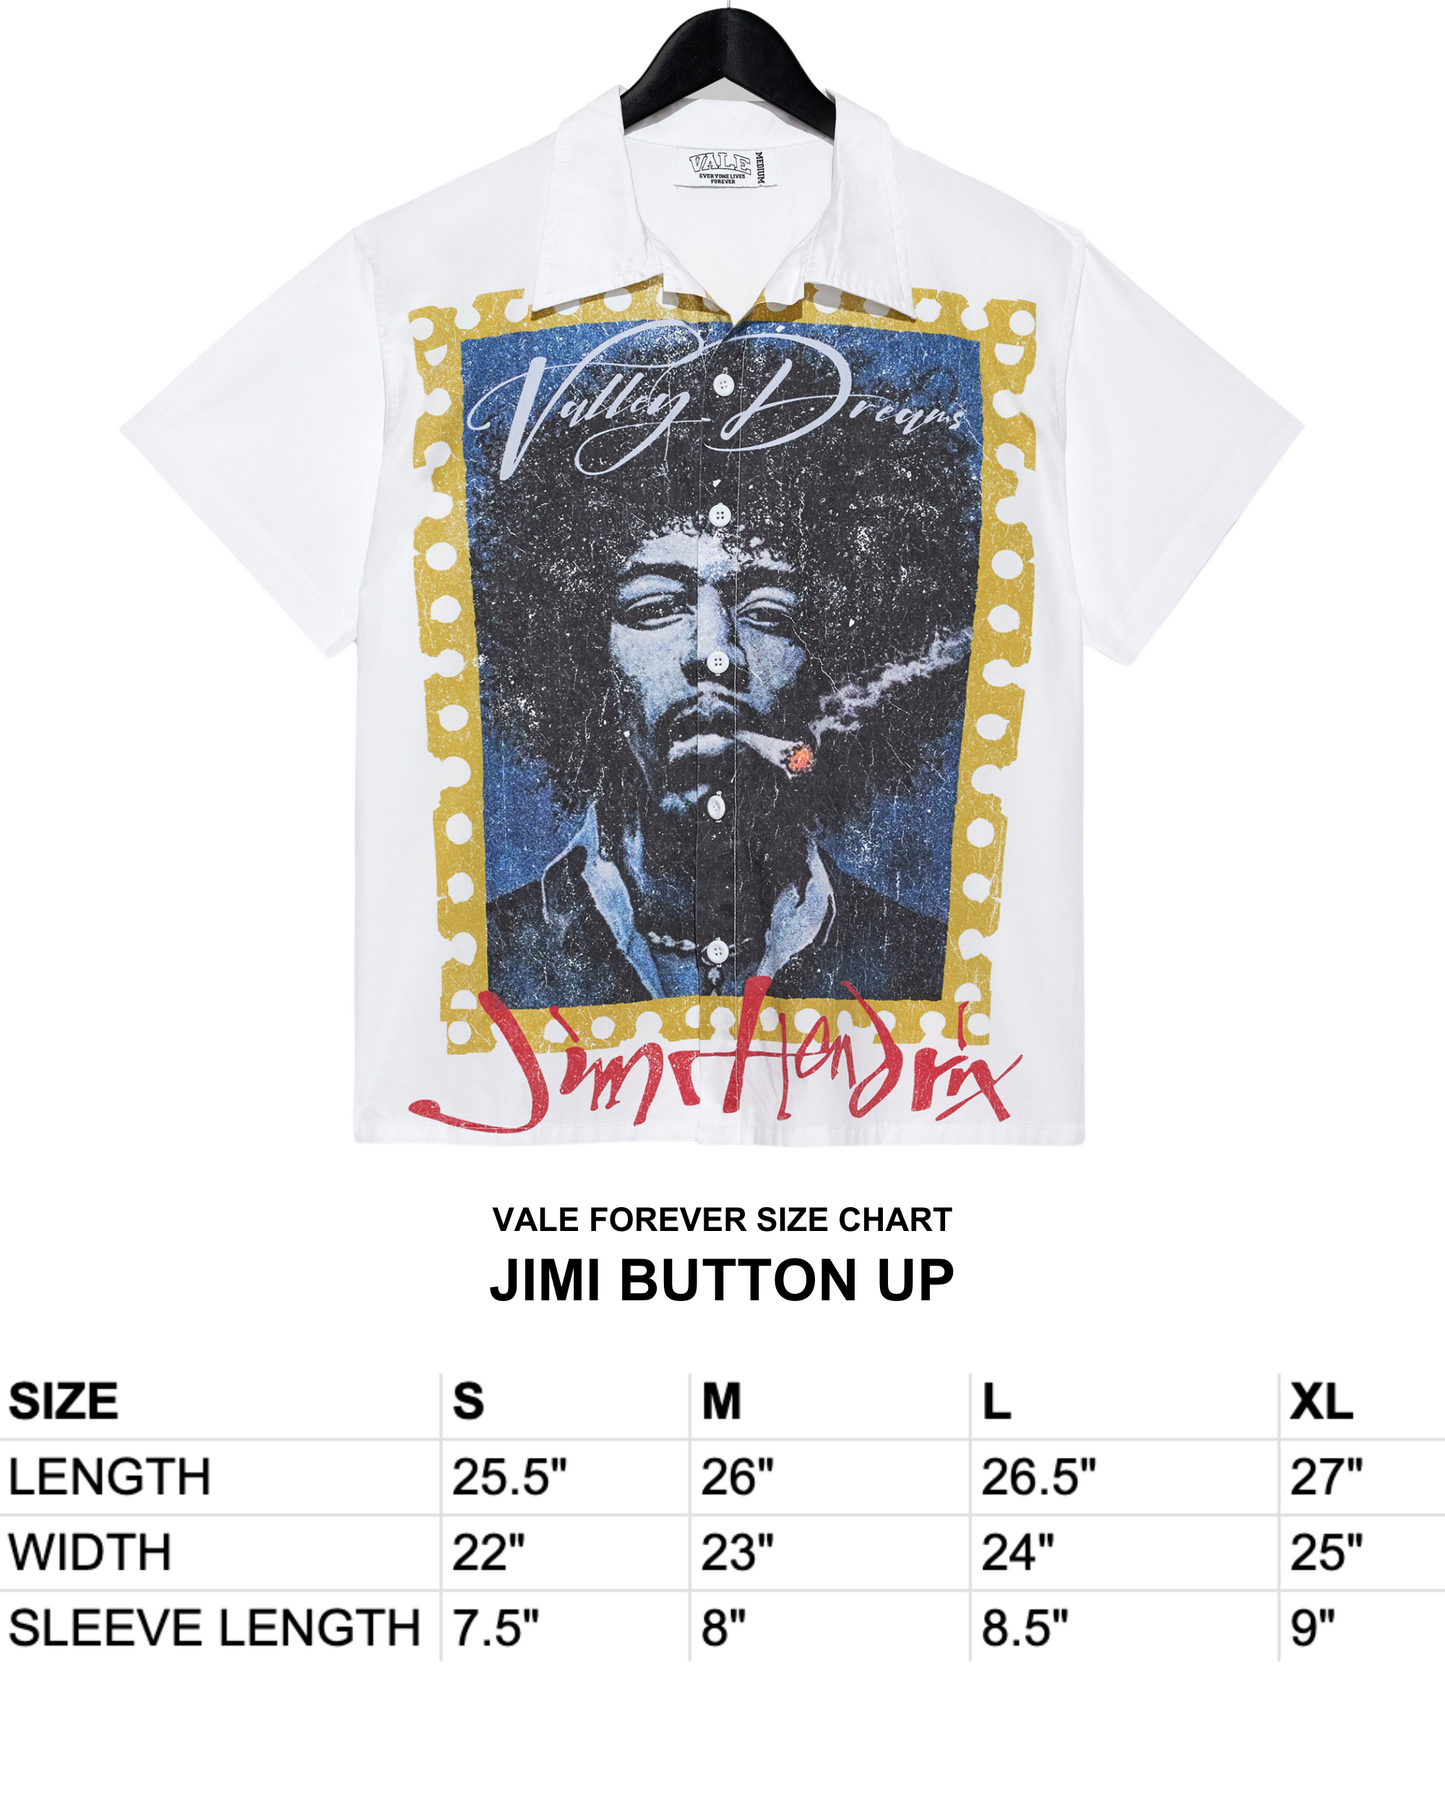 JIMI BUTTON UP